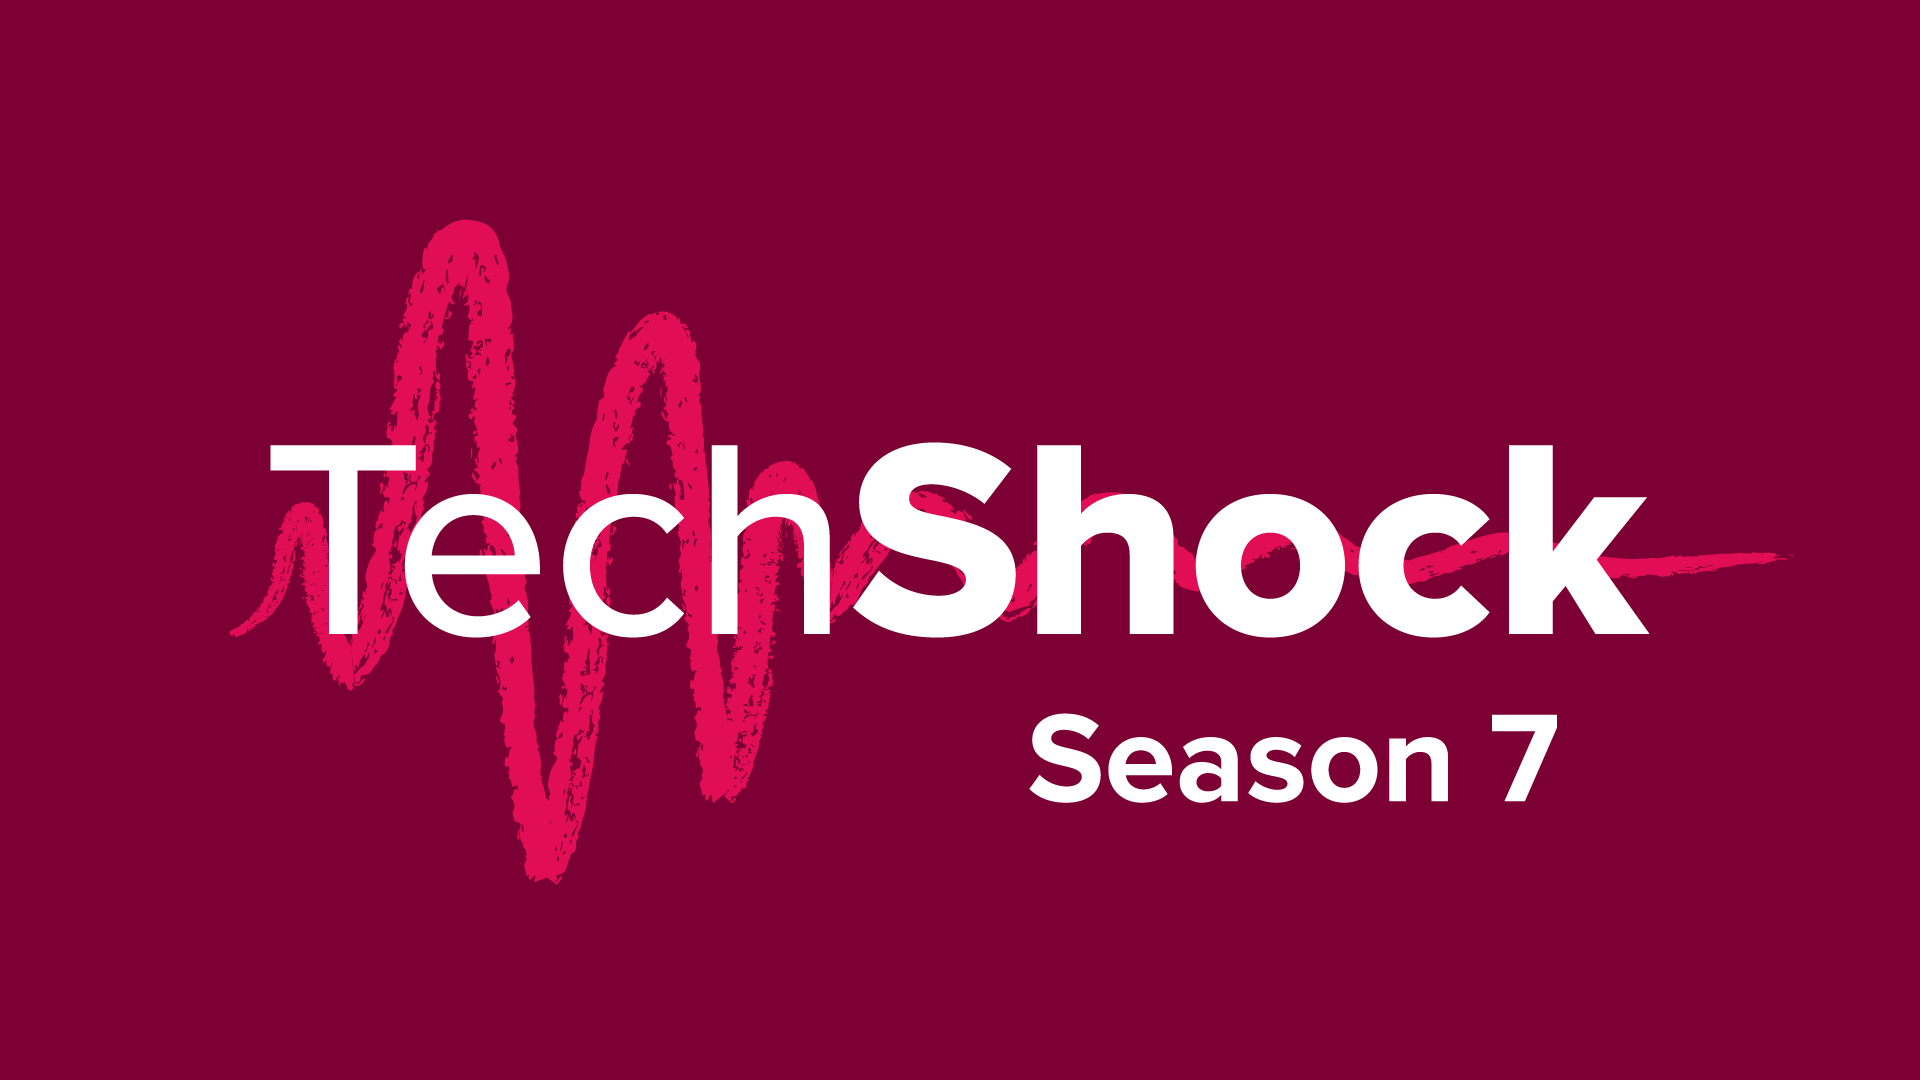 The Tech Shock podcast – a problem hiding in plain sight? 